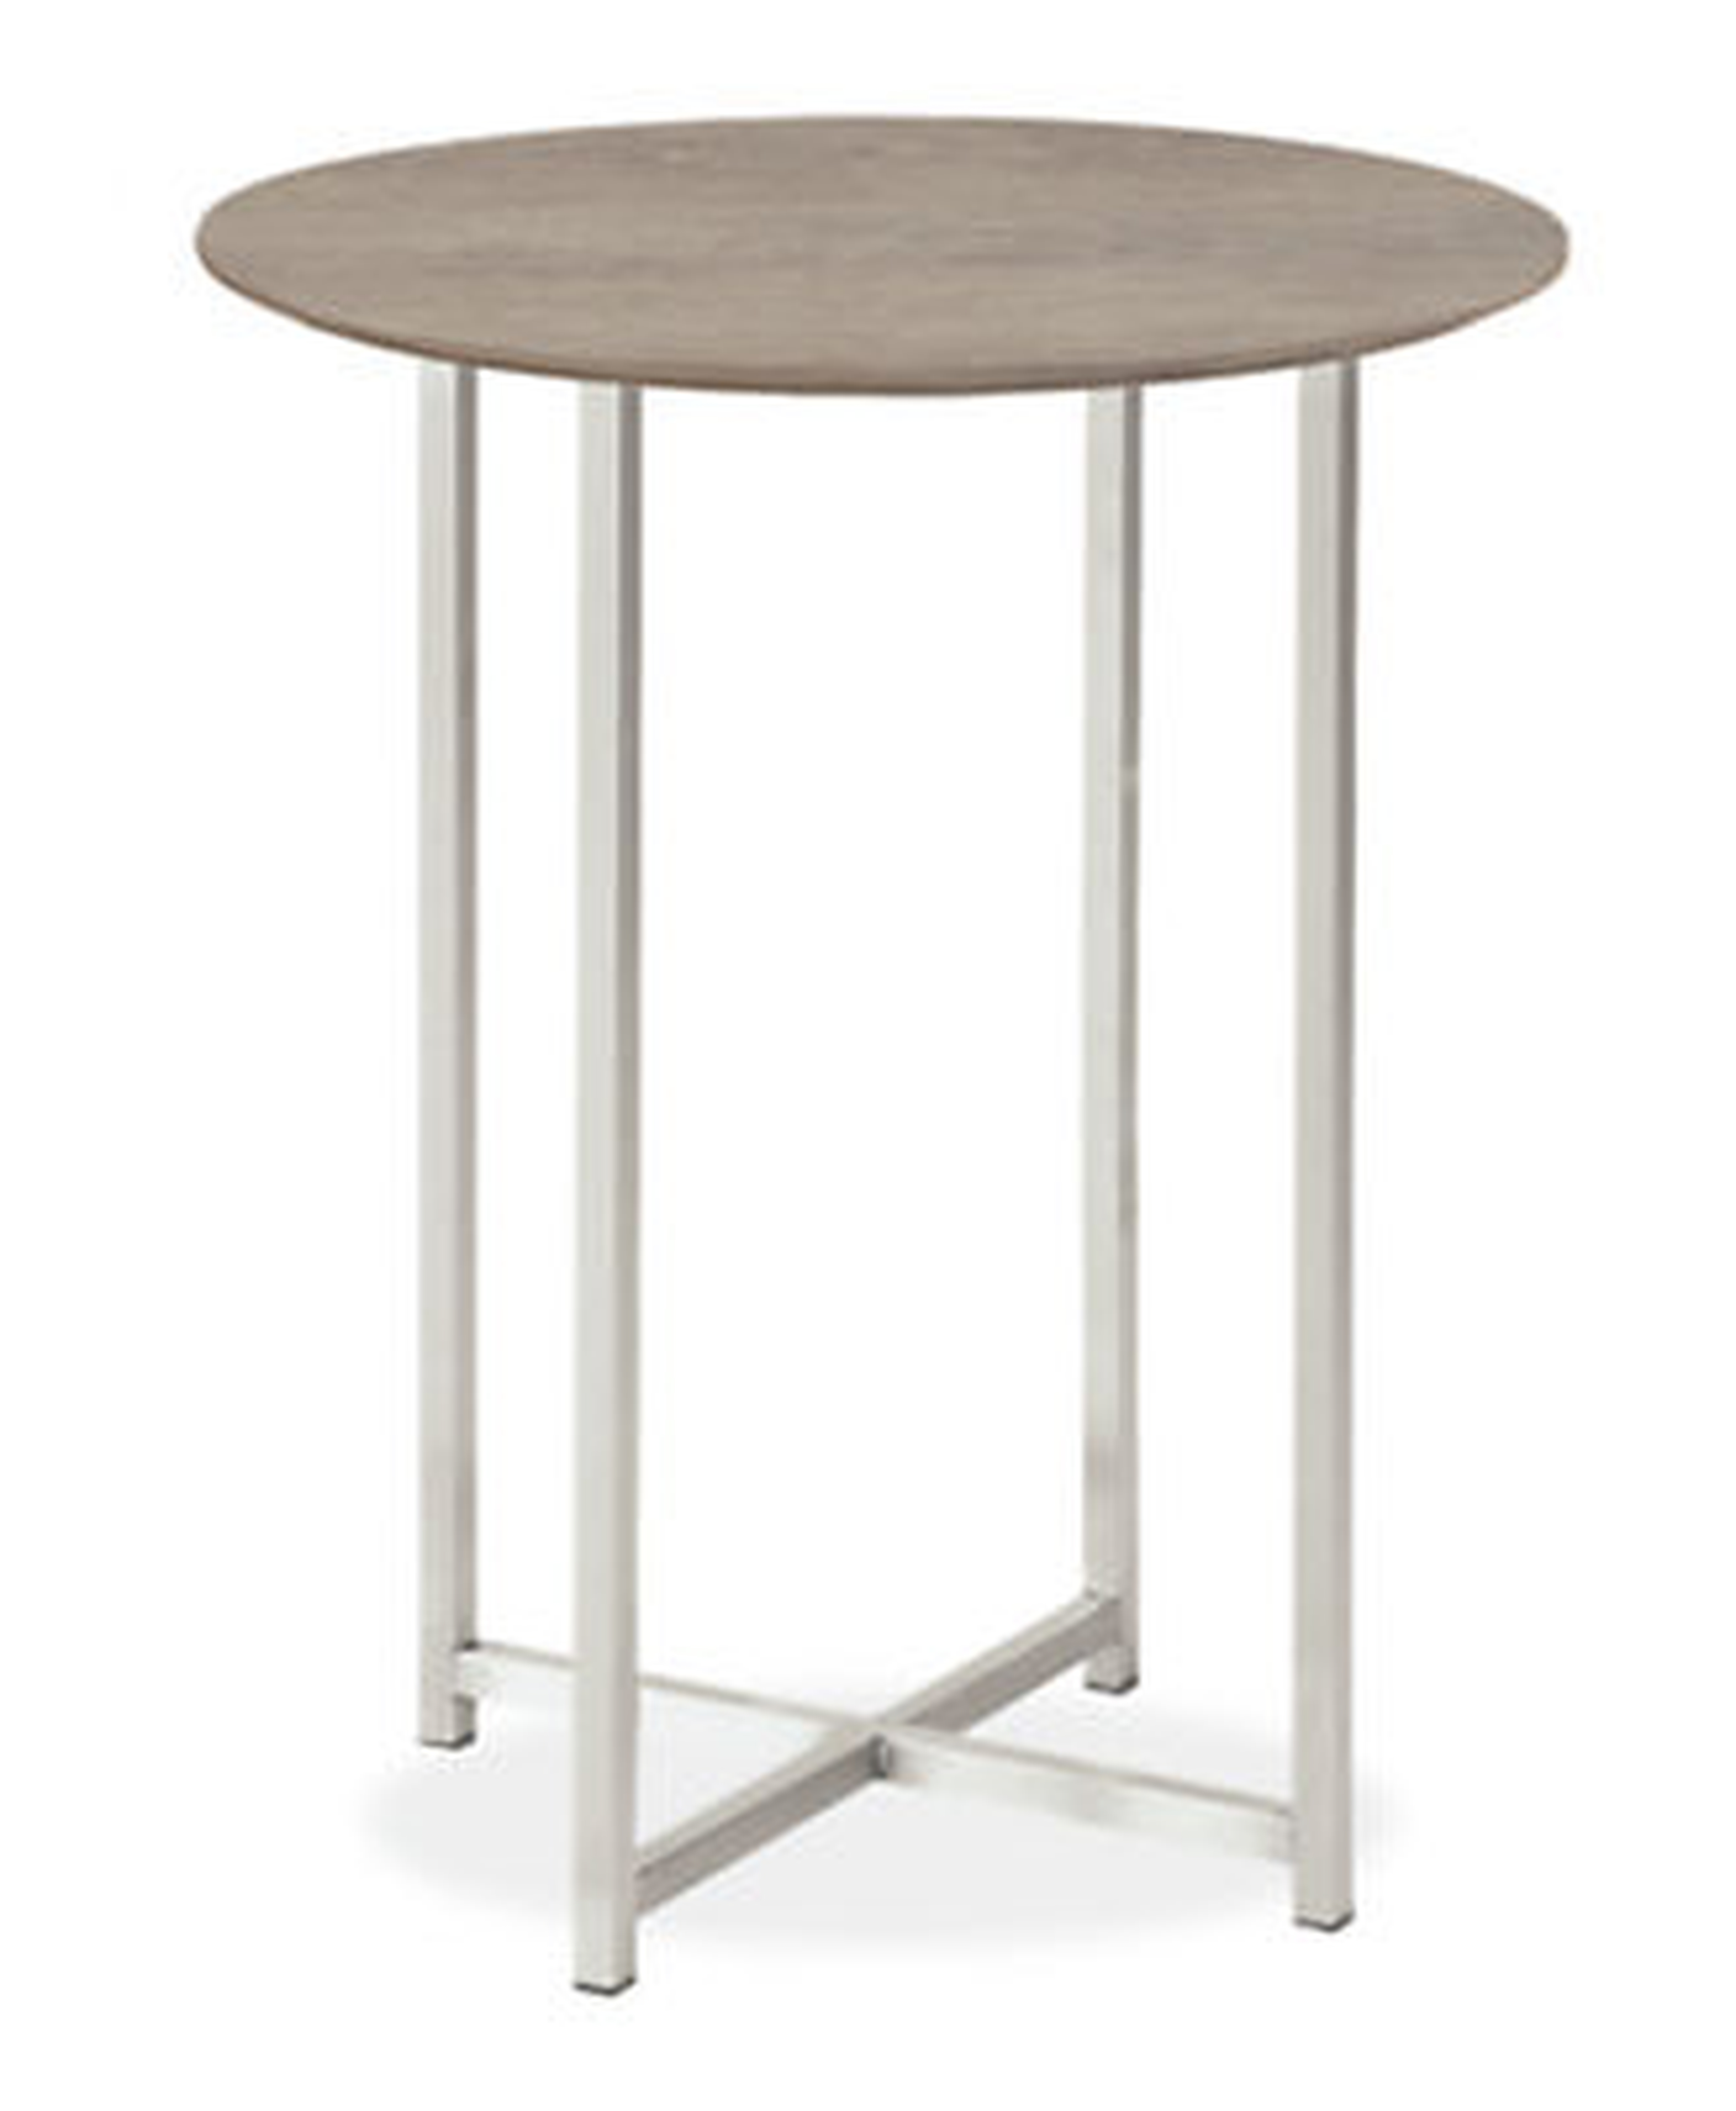 Classic End Tables in Stainless Steel - Room & Board